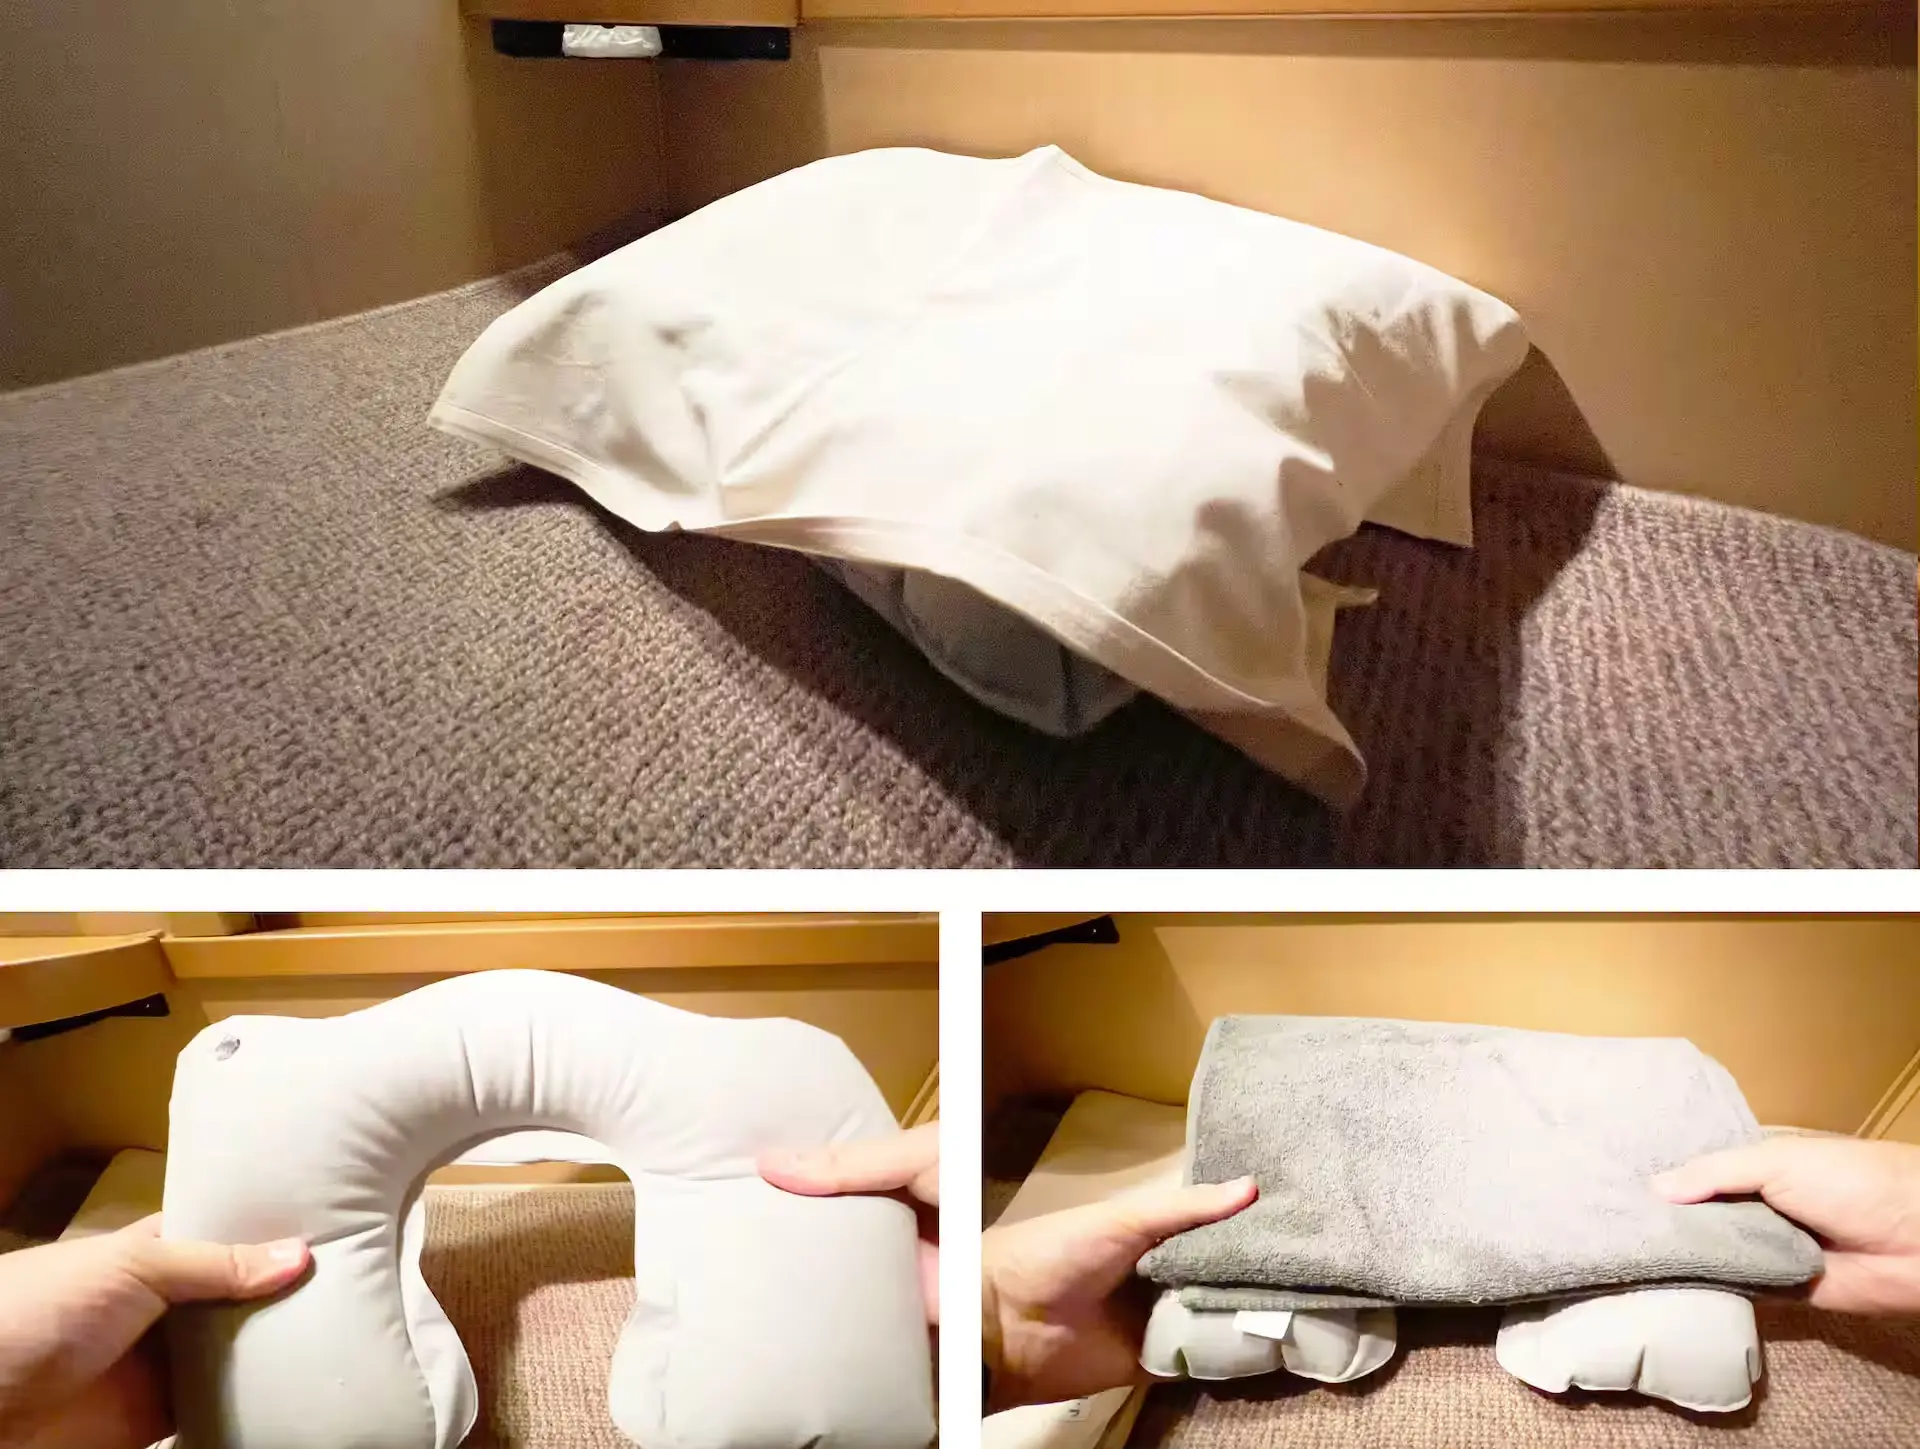 Making a pillow using the neck pillow I brought with me at the NOBI-NOBI seat on the sleeper express Sunrise Izumo